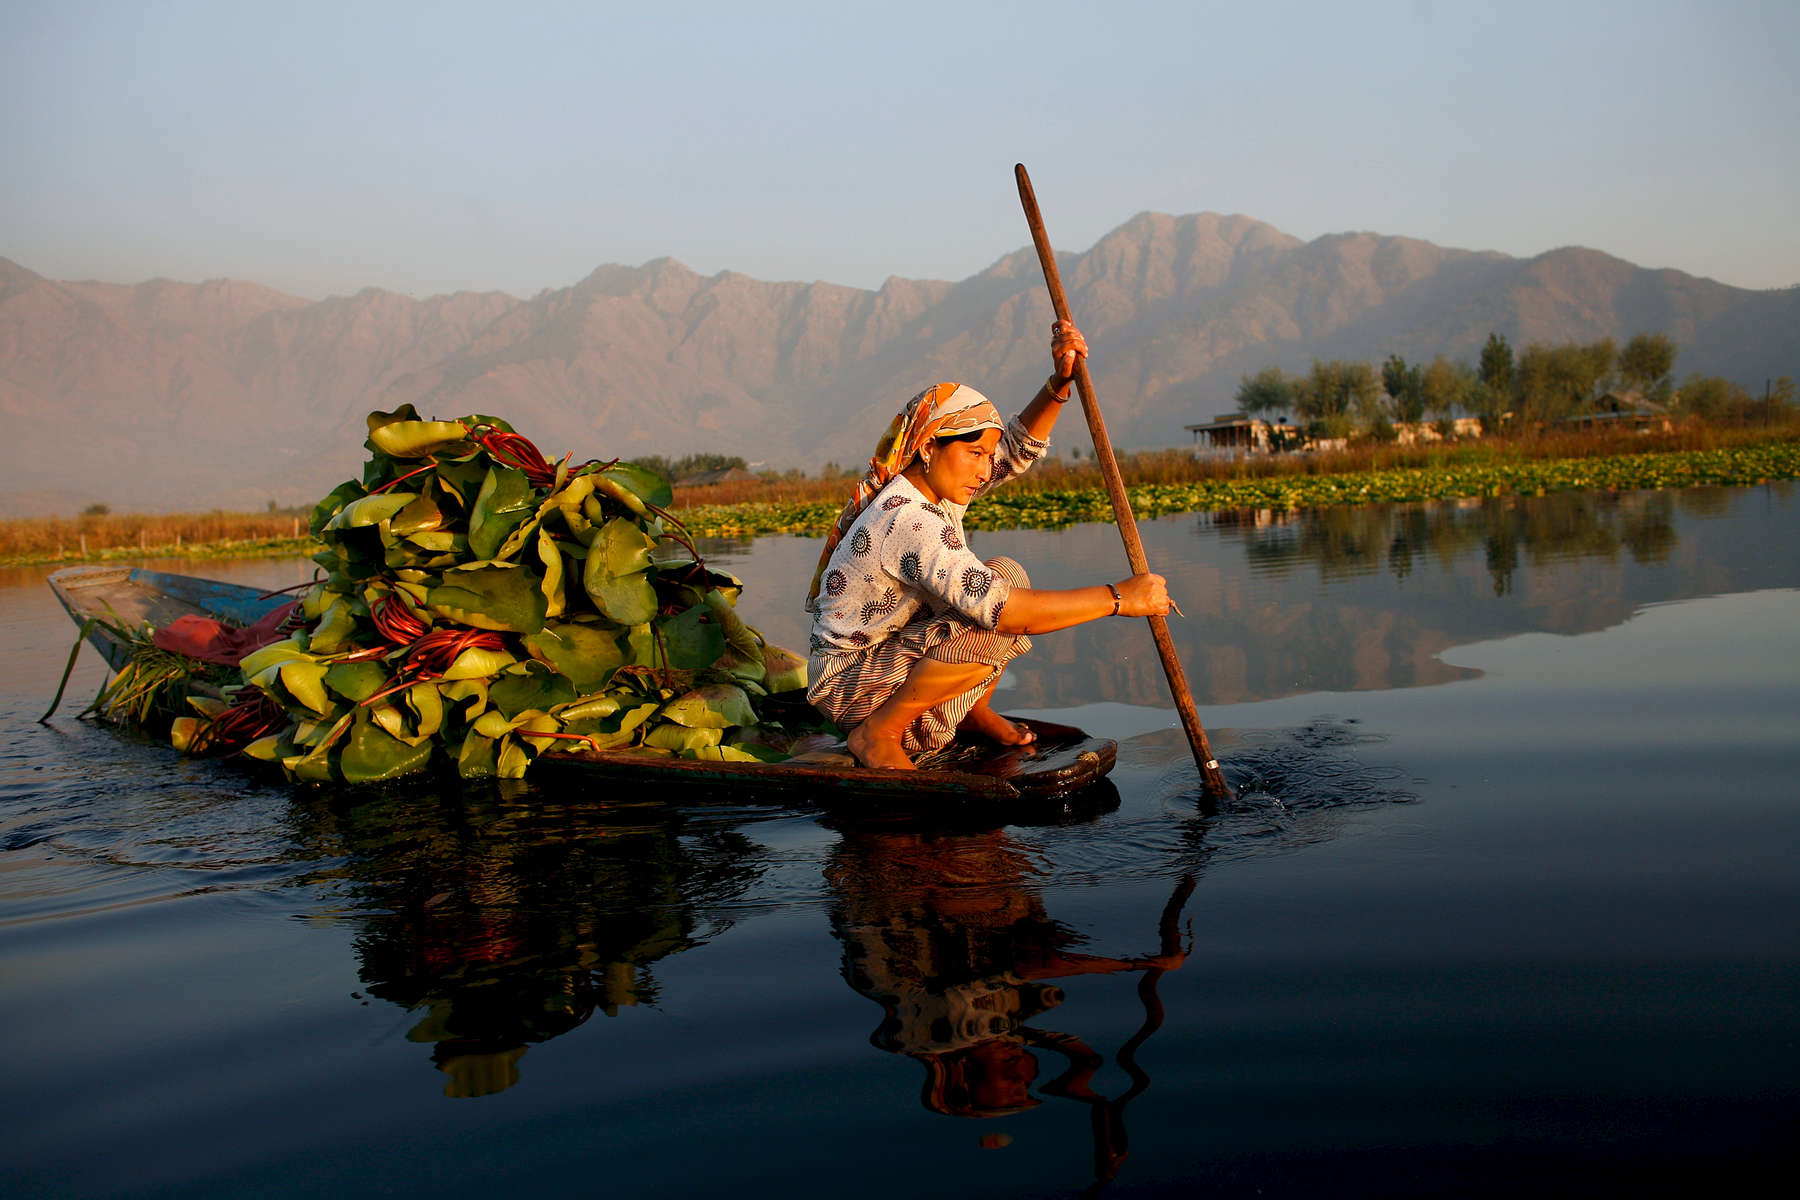 SRINAGAR, INDIA - OCTOBER 4 :A Kashmiri woman paddles along on Dal Lake October 4, 2008 in Srinagar, Kashmir. In the past few months the region's summer captiol has witnessed the biggest pro-independence demonstrations since the separatist insurgency erupted in 1989. The protests have triggered a heavy crackdown by Indian security forces including many strict curfews and with that tourist numbers have dropped significantly. Continous disturbances have brought down hotel occupancy from 100 percent in May 2008 to almost zero in September 2008,{quote} according to government statements.  (Photo Paula Bronstein/Getty Images)